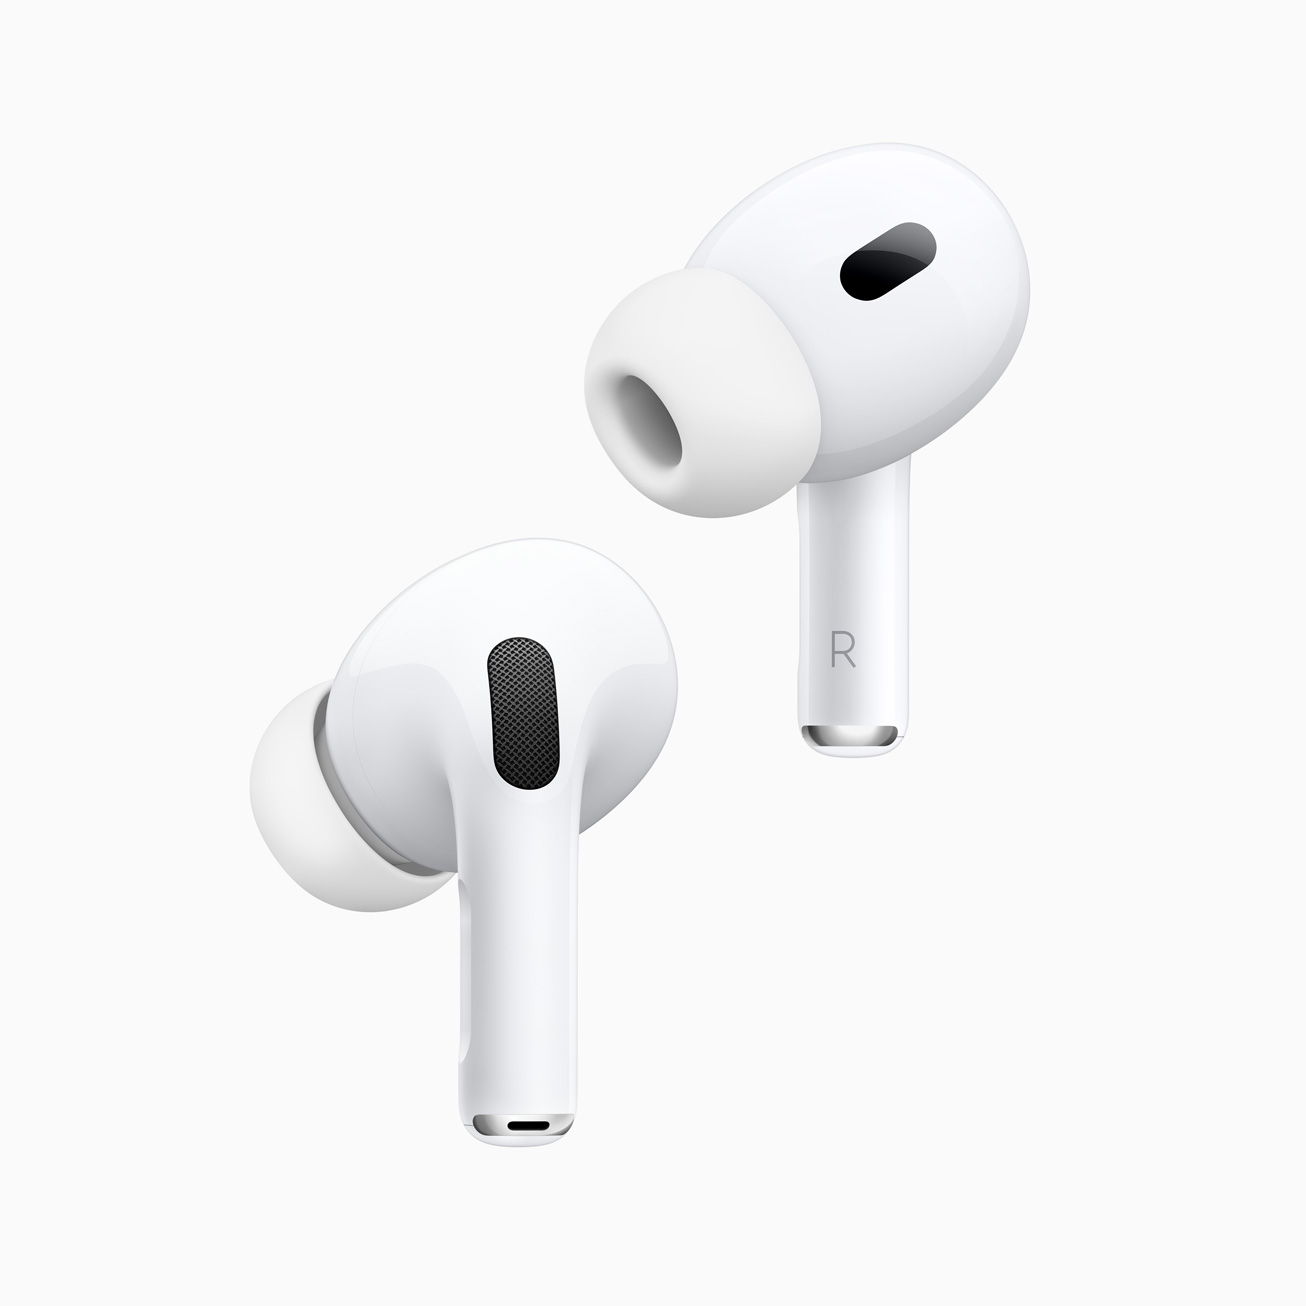 Leak reveals details about Apple AirPods Pro and AirPods Max with